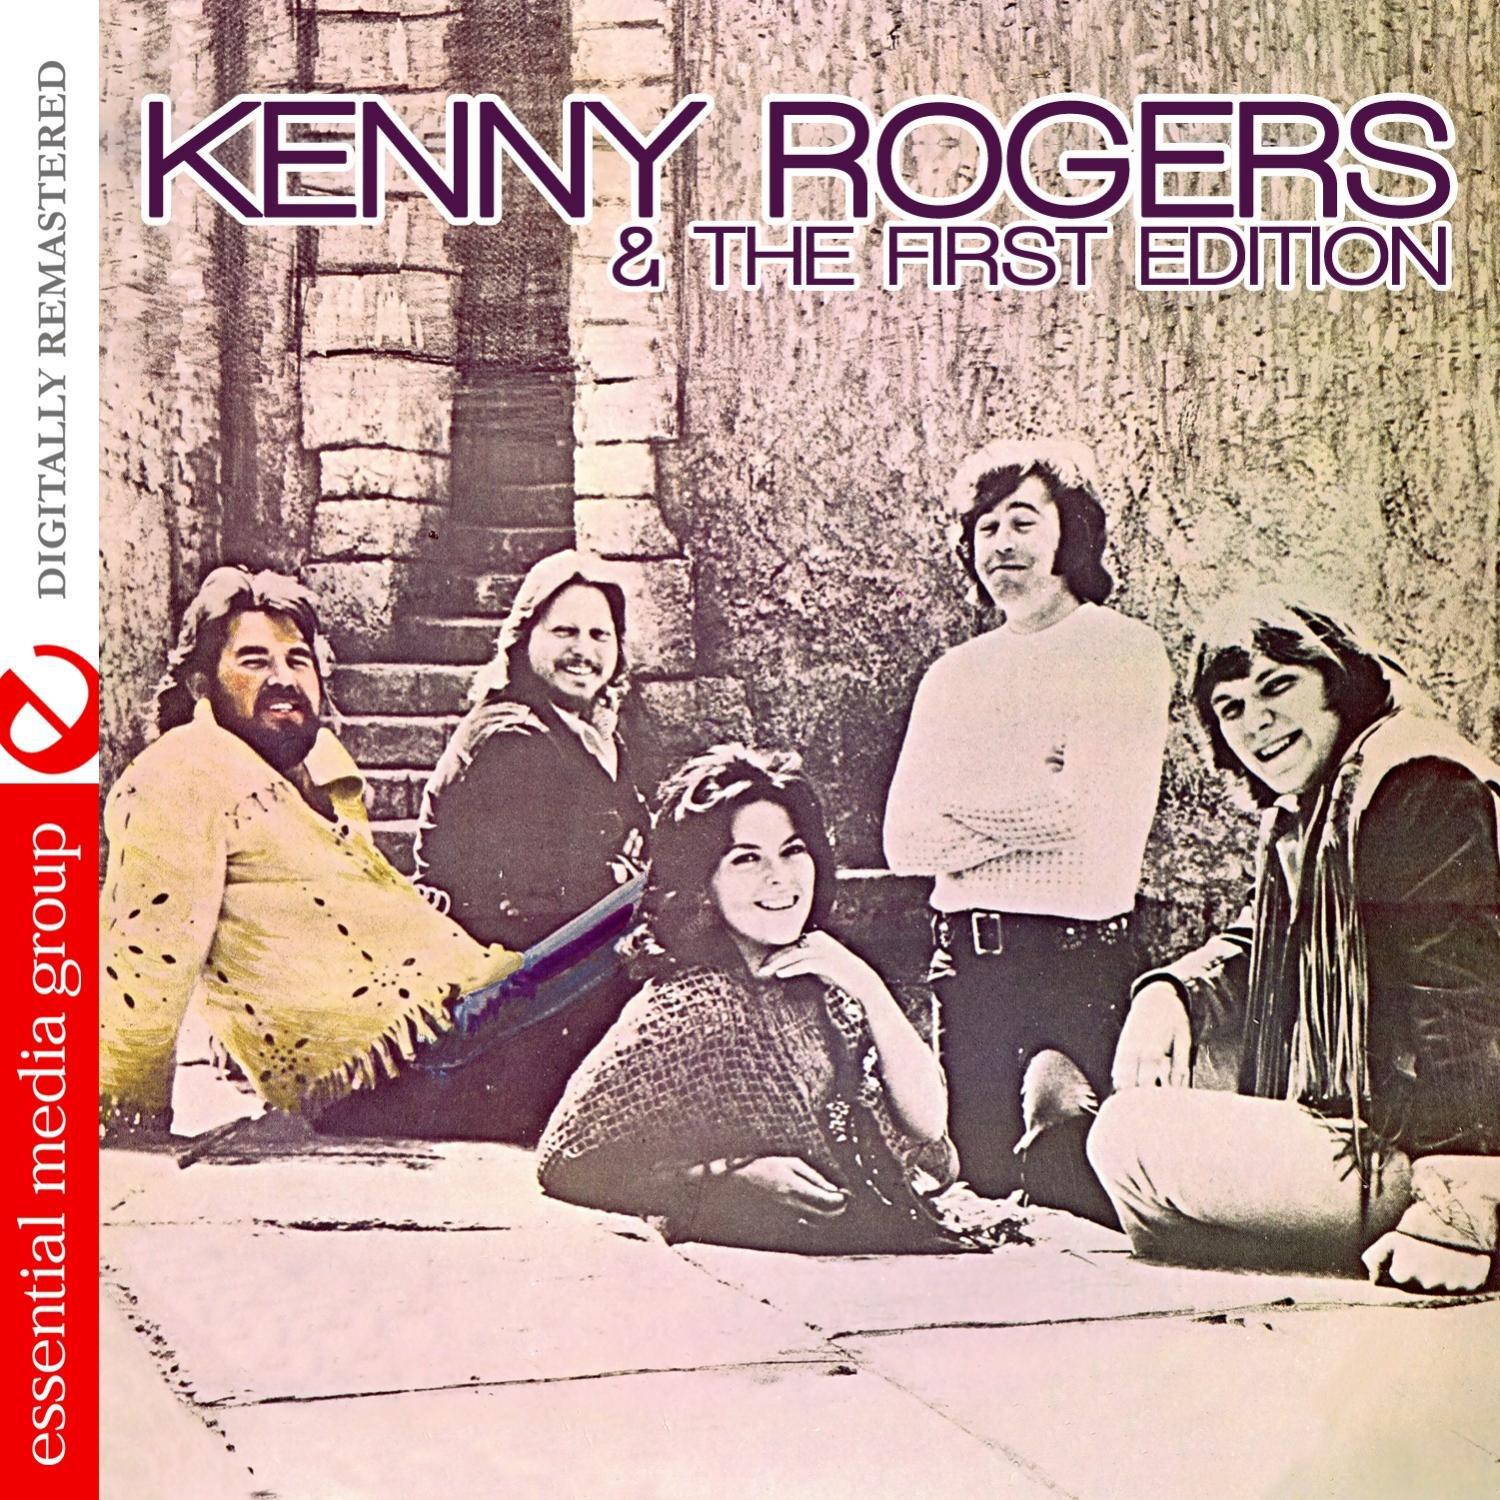 Kenny Rogers & The First Edition (Digitally Remastered)专辑